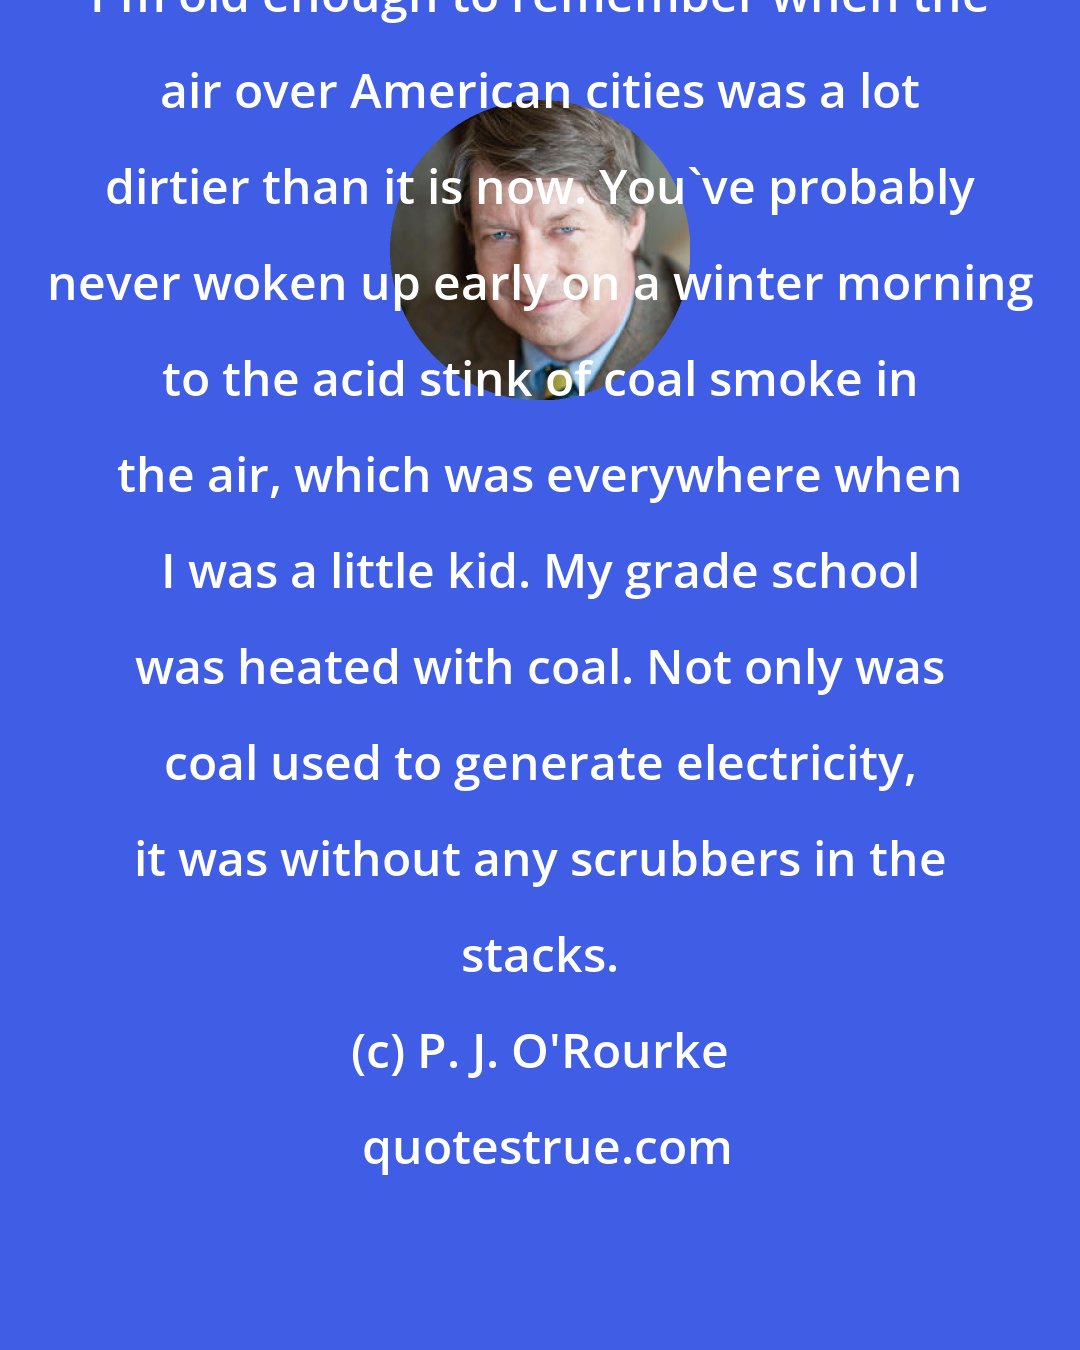 P. J. O'Rourke: I'm old enough to remember when the air over American cities was a lot dirtier than it is now. You've probably never woken up early on a winter morning to the acid stink of coal smoke in the air, which was everywhere when I was a little kid. My grade school was heated with coal. Not only was coal used to generate electricity, it was without any scrubbers in the stacks.